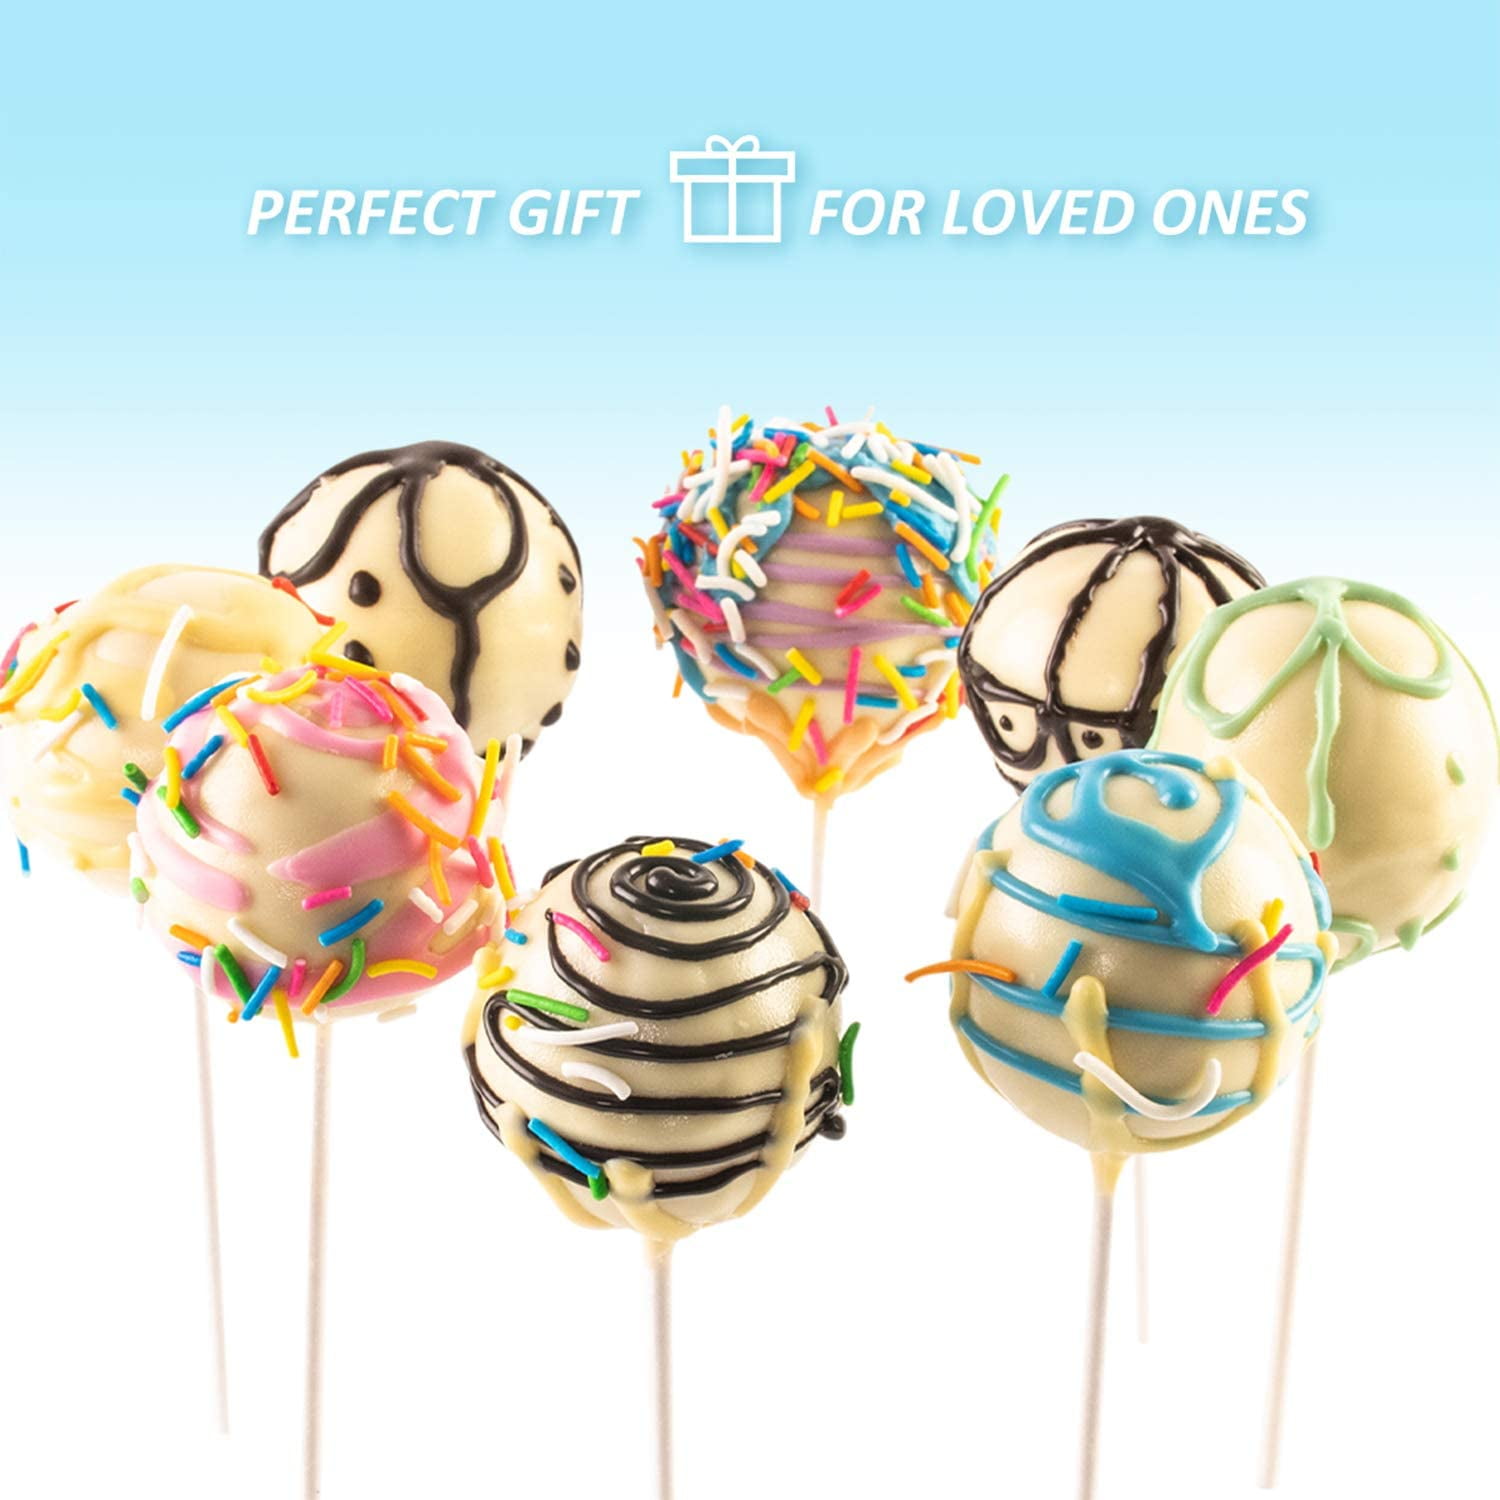 Lollipop Sticks Bleached Aqua 3 Tier Display Stand Cake Pop Maker Set Including Silicone Lollipop Molds Decorating Pen Chocolate Candy Melting Pot Silicone Cupcake Molds Bags and Twist Ties 